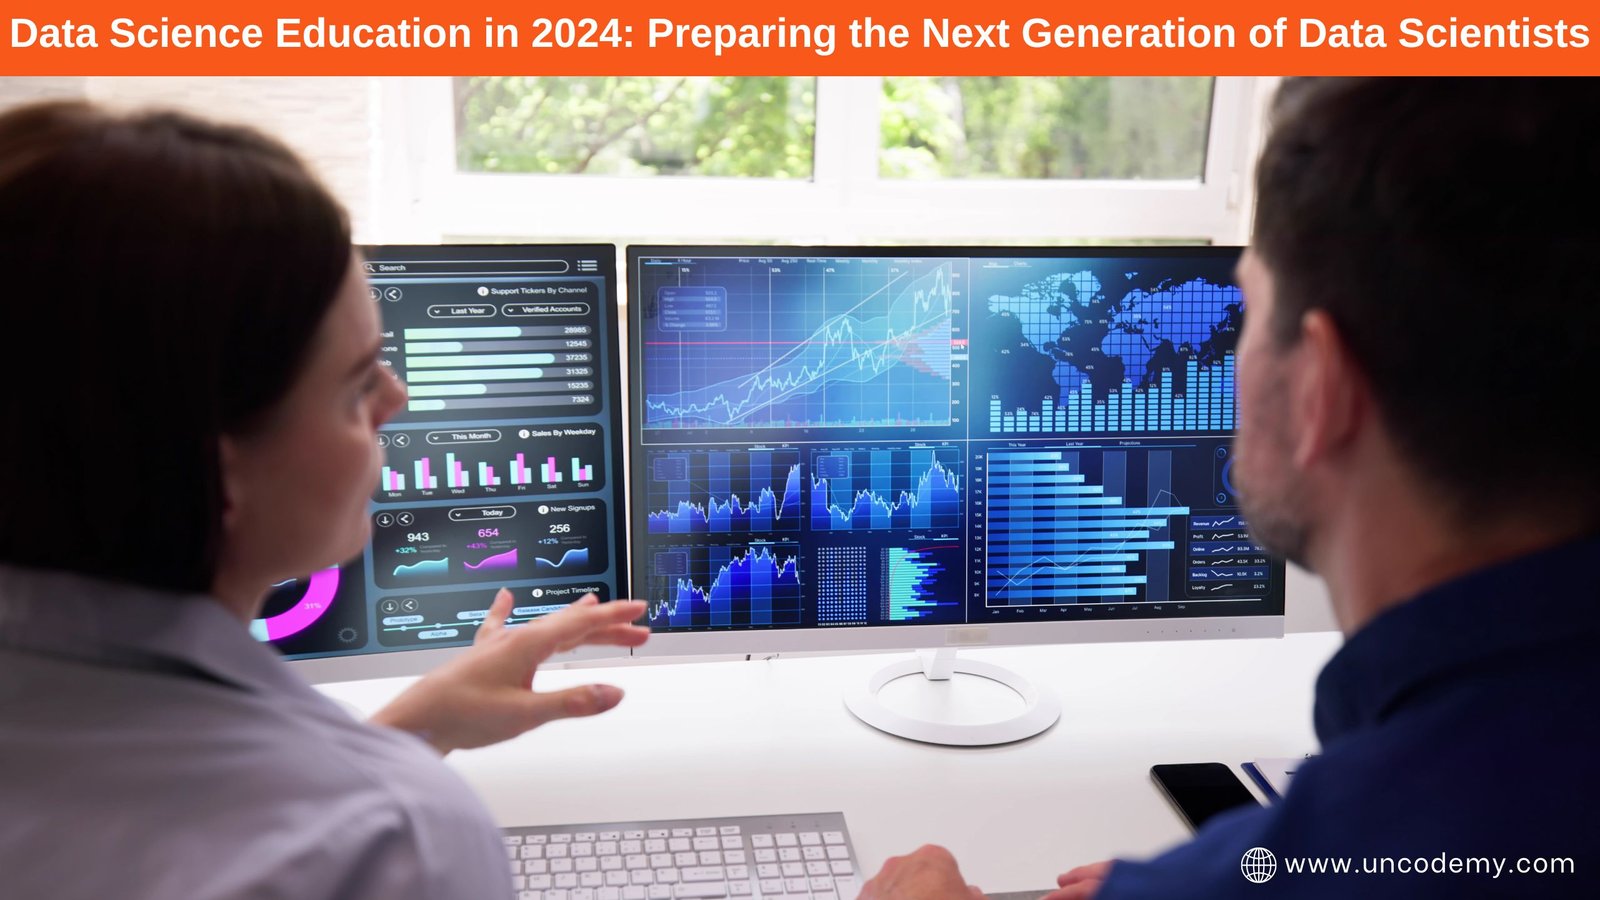 Data Science Education in 2024 Preparing the Next Generation of Data Scientists